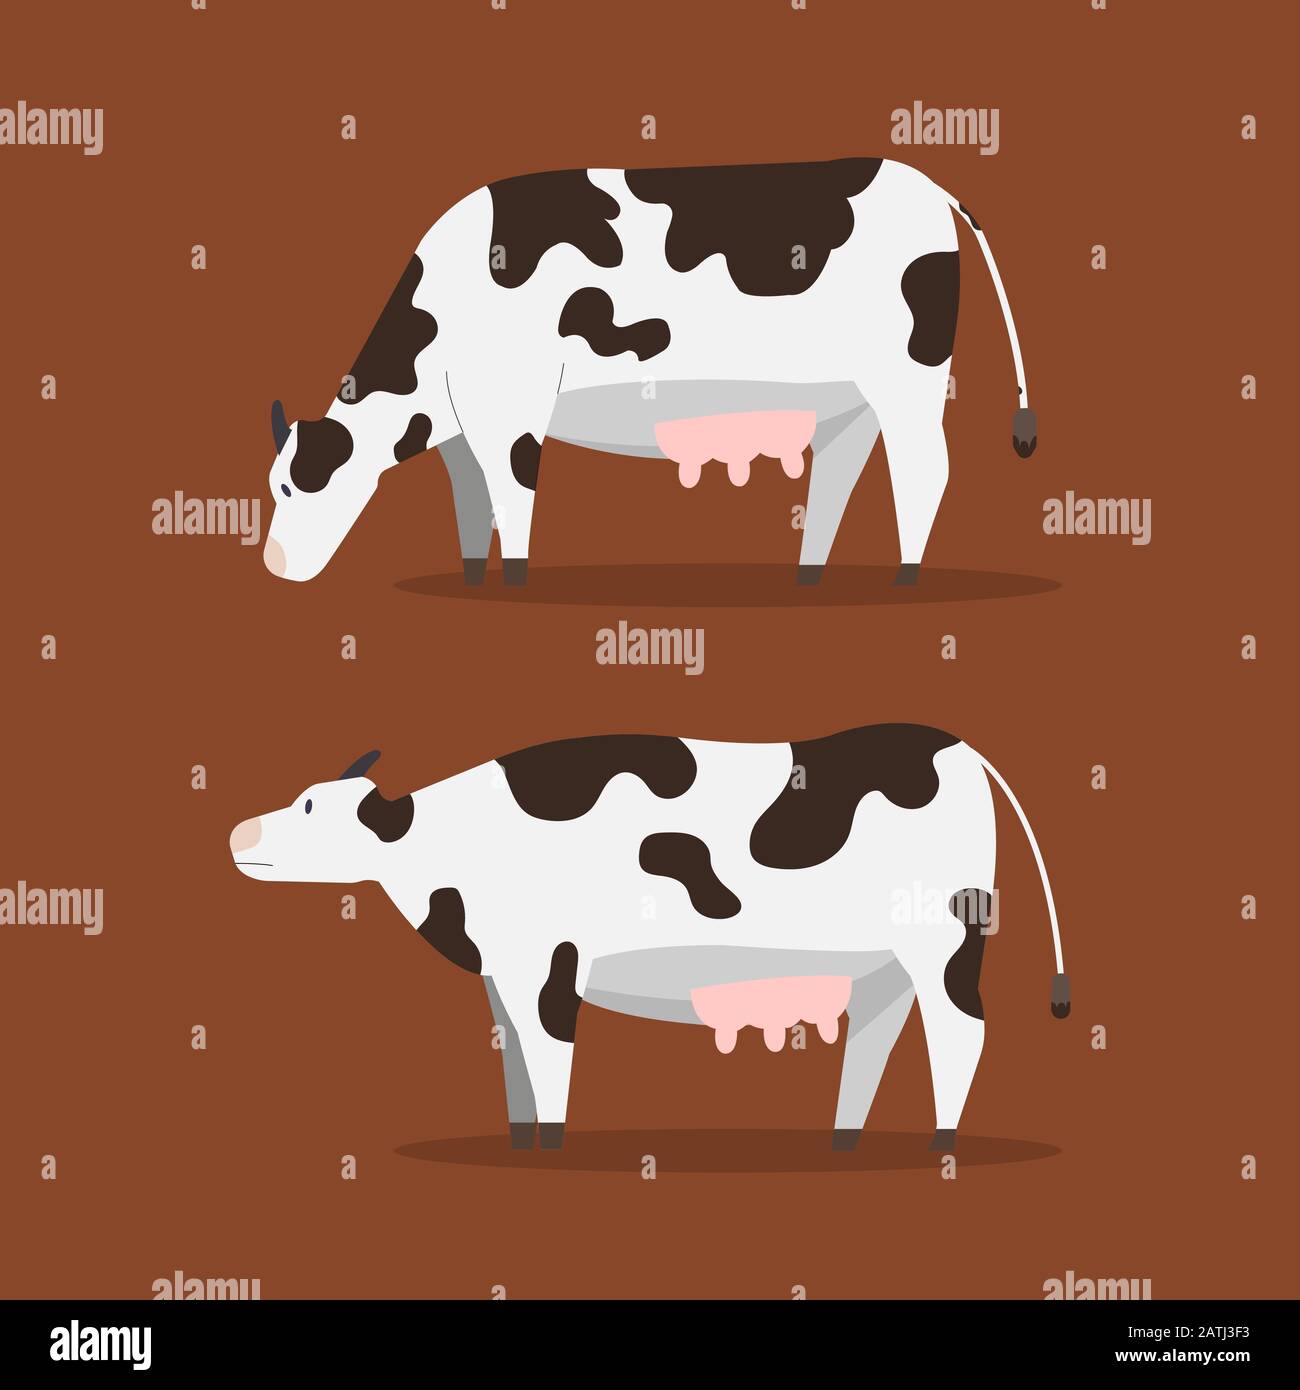 Cute Cow Stock Photos, Images and Backgrounds for Free Download